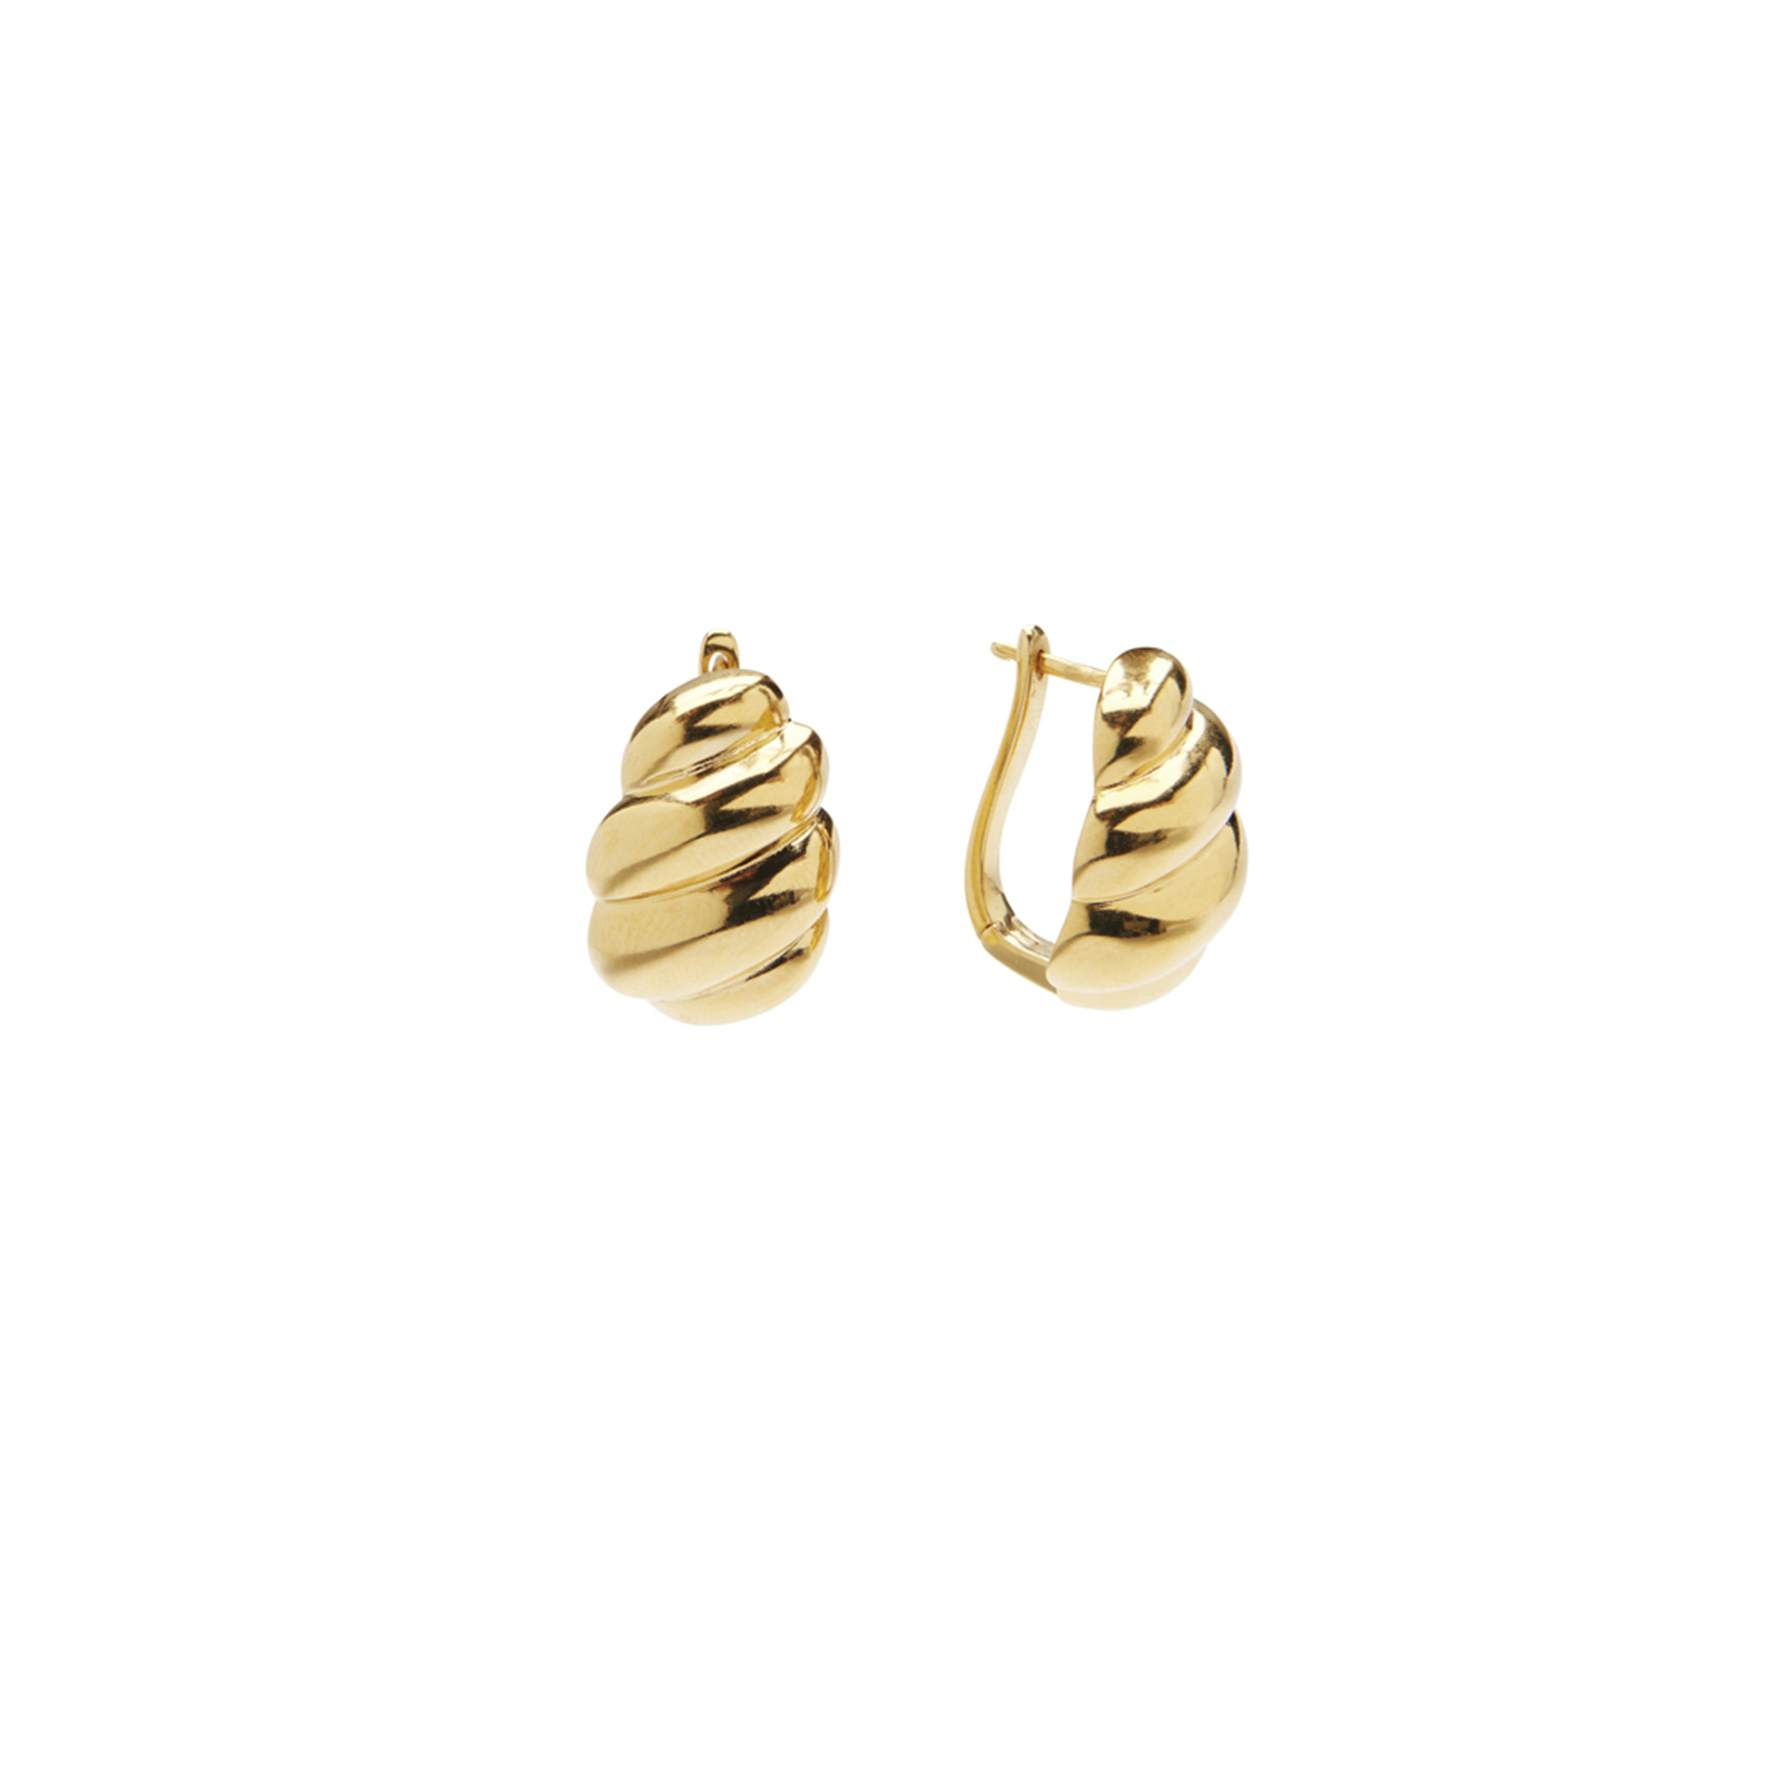 Brooke Earrings from Pico in Goldplated-Silver Sterling 925